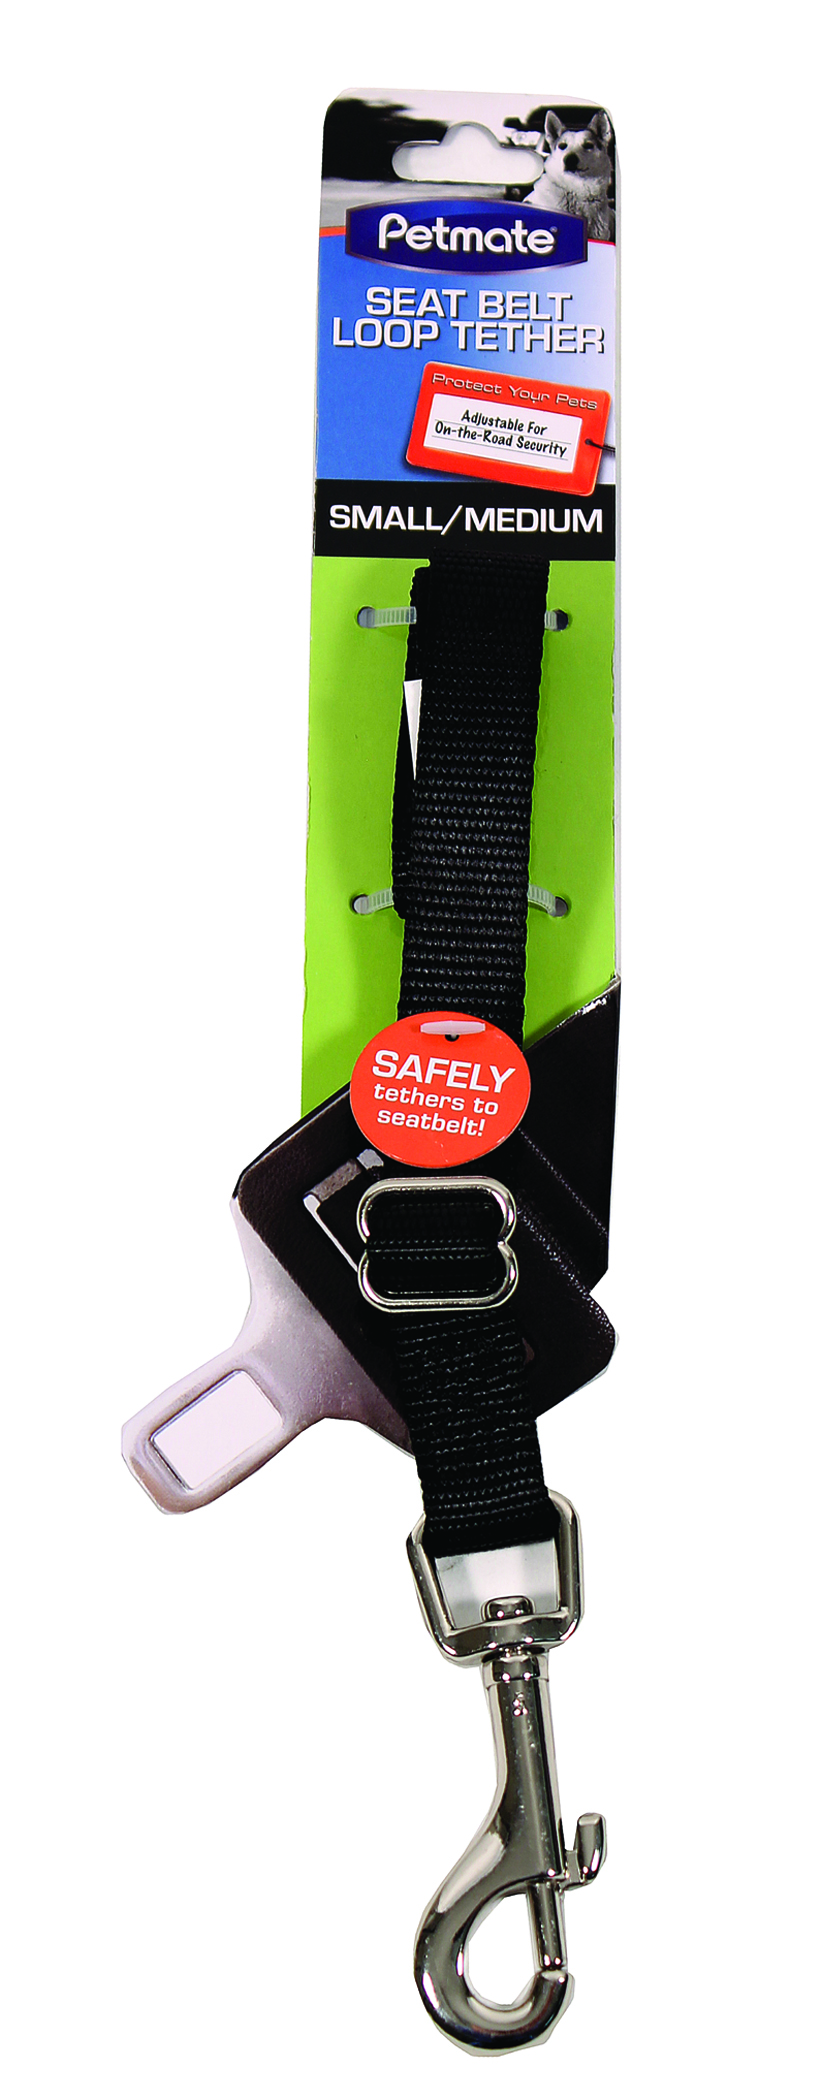 SEAT BELT LOOP TETHER FOR DOGS